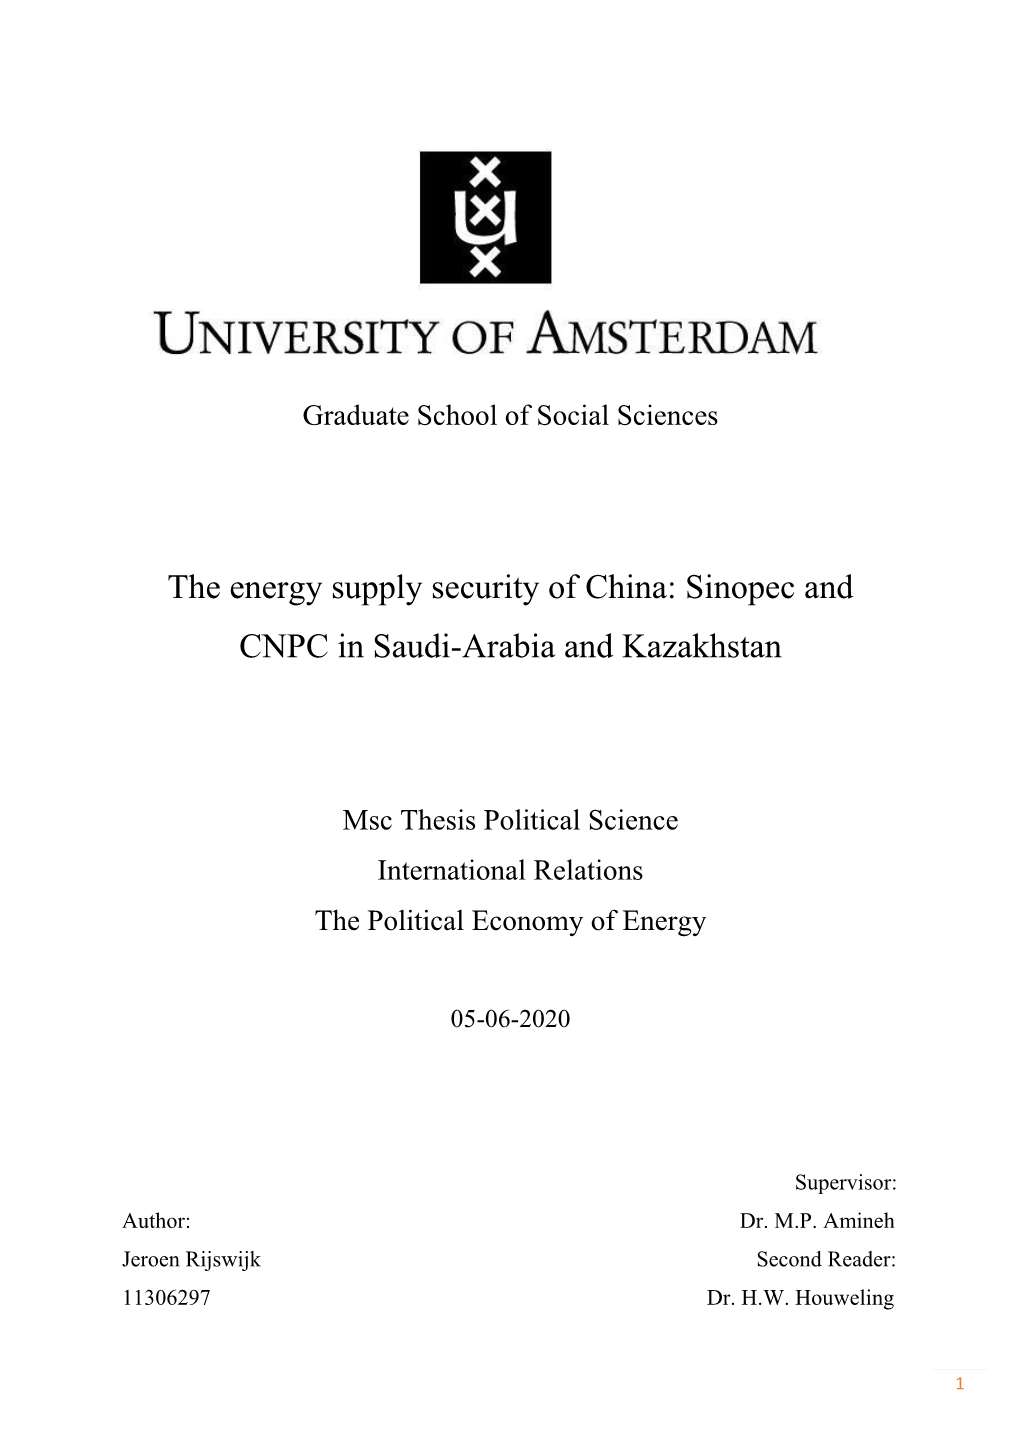 The Energy Supply Security of China: Sinopec and CNPC in Saudi-Arabia and Kazakhstan